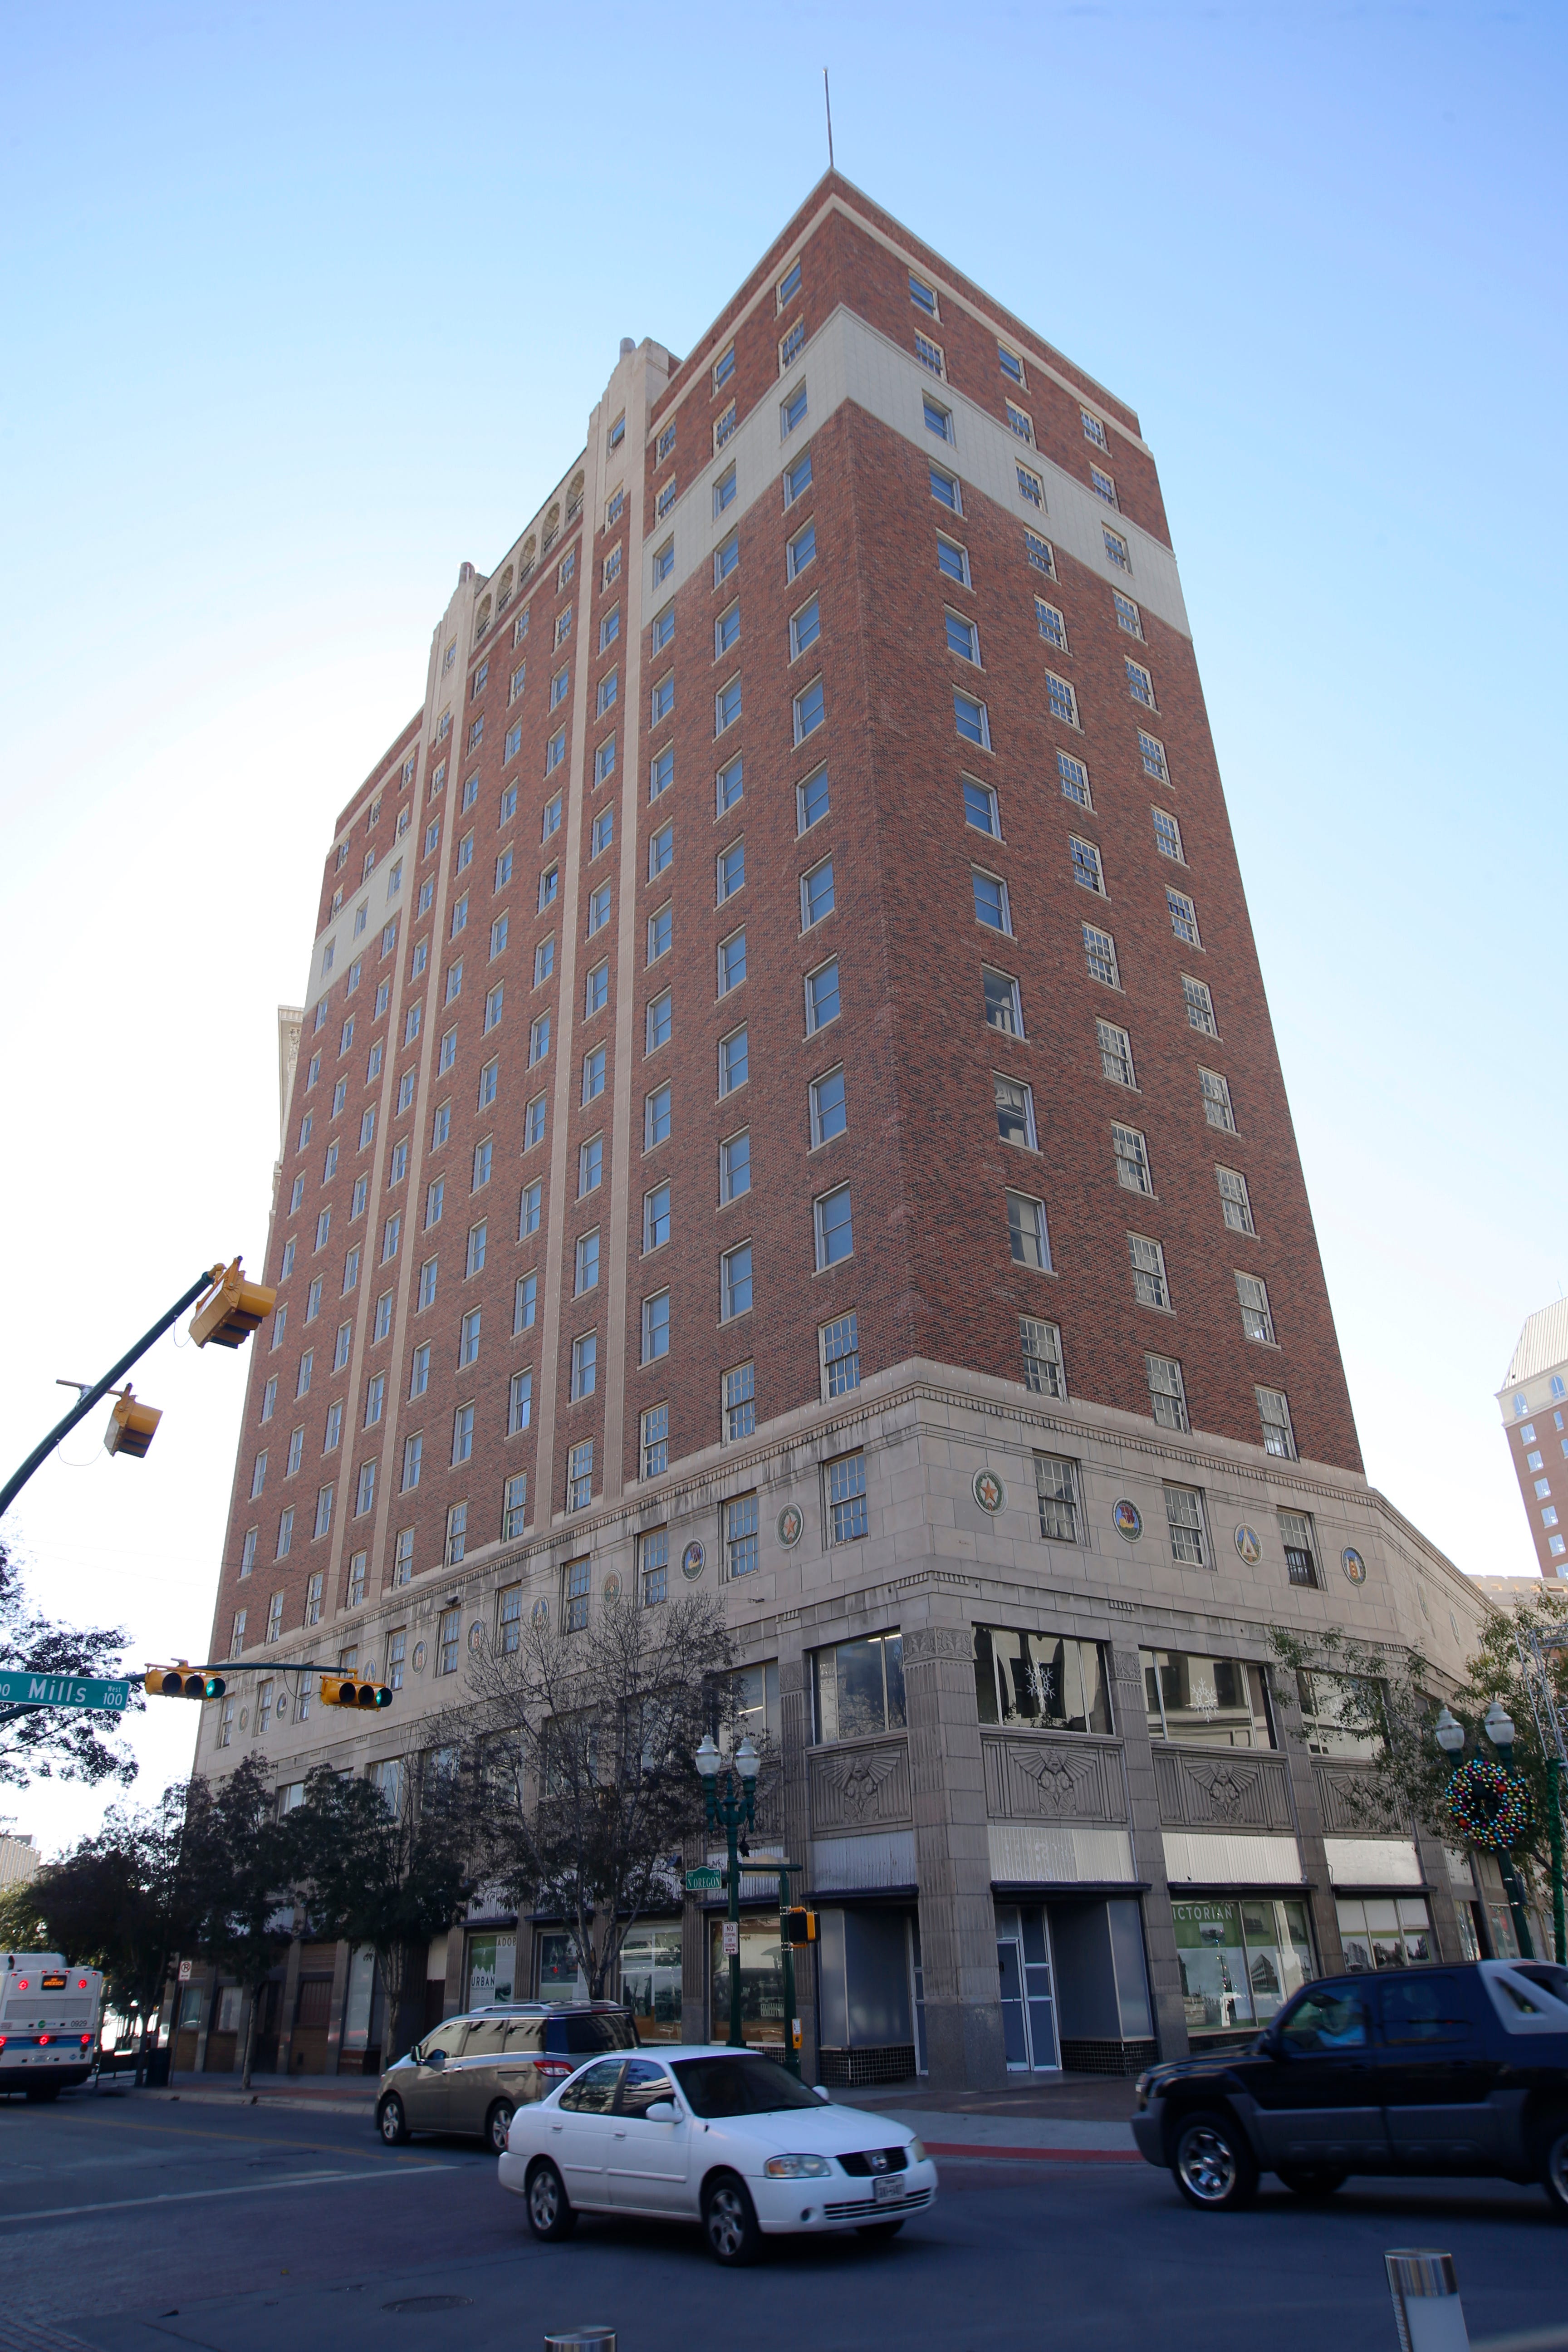 Plaza Hotel renovation getting $1.34 million in tax rebates from El Paso County